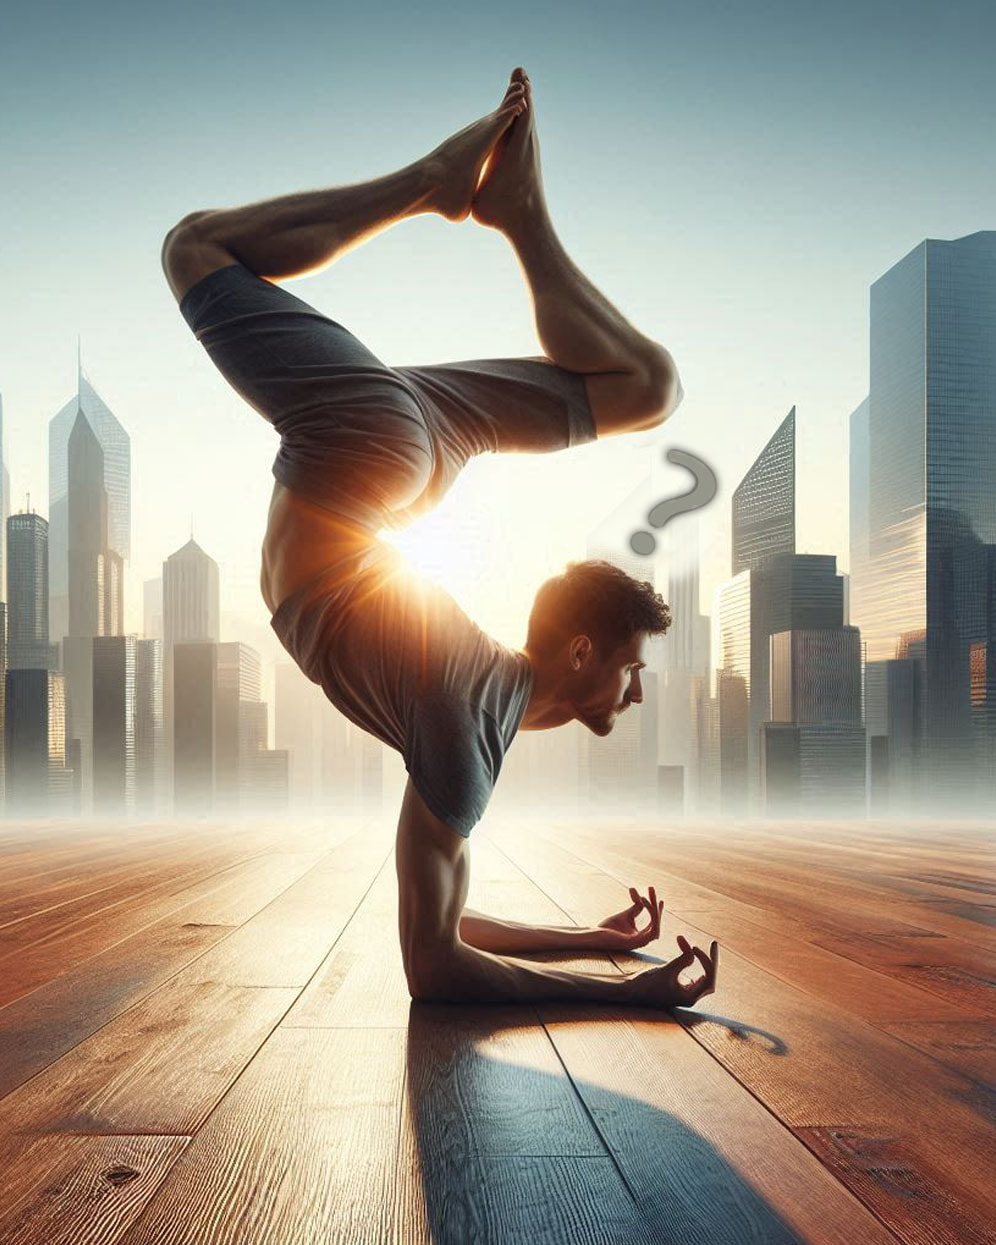 Yoga is more than mental and physical health